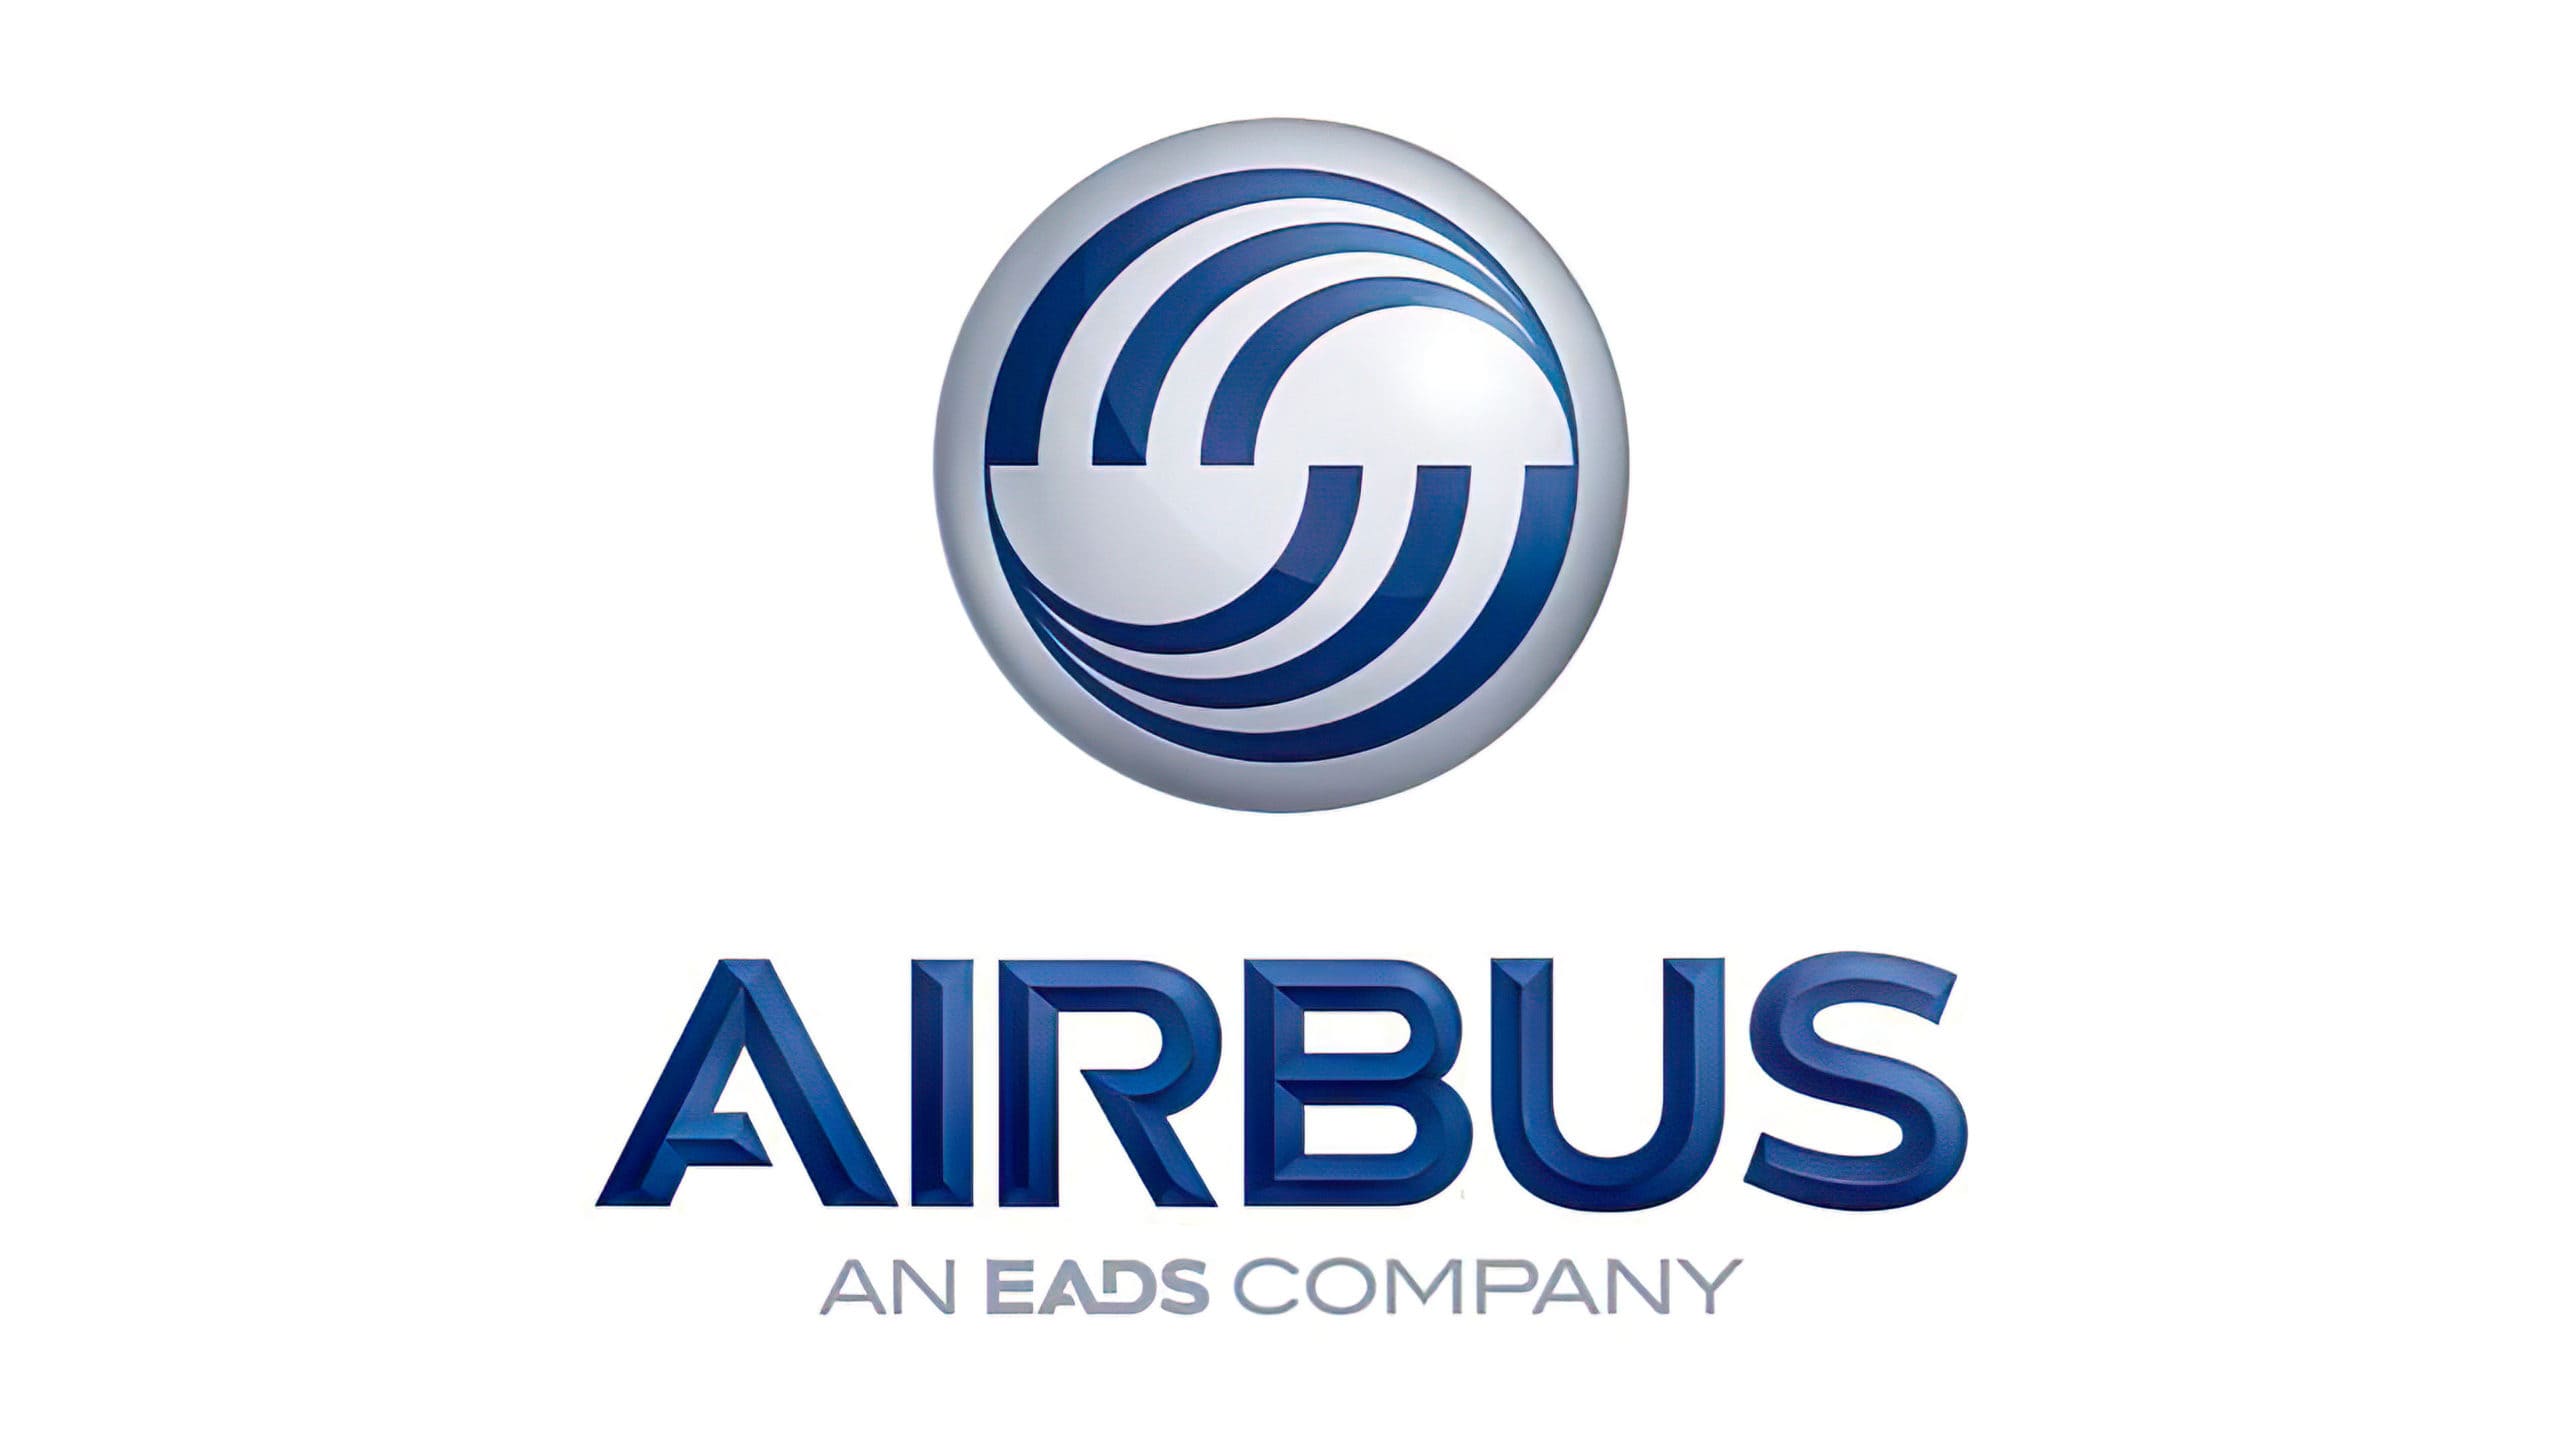 Airbus Logo | The most famous brands and company logos in the world